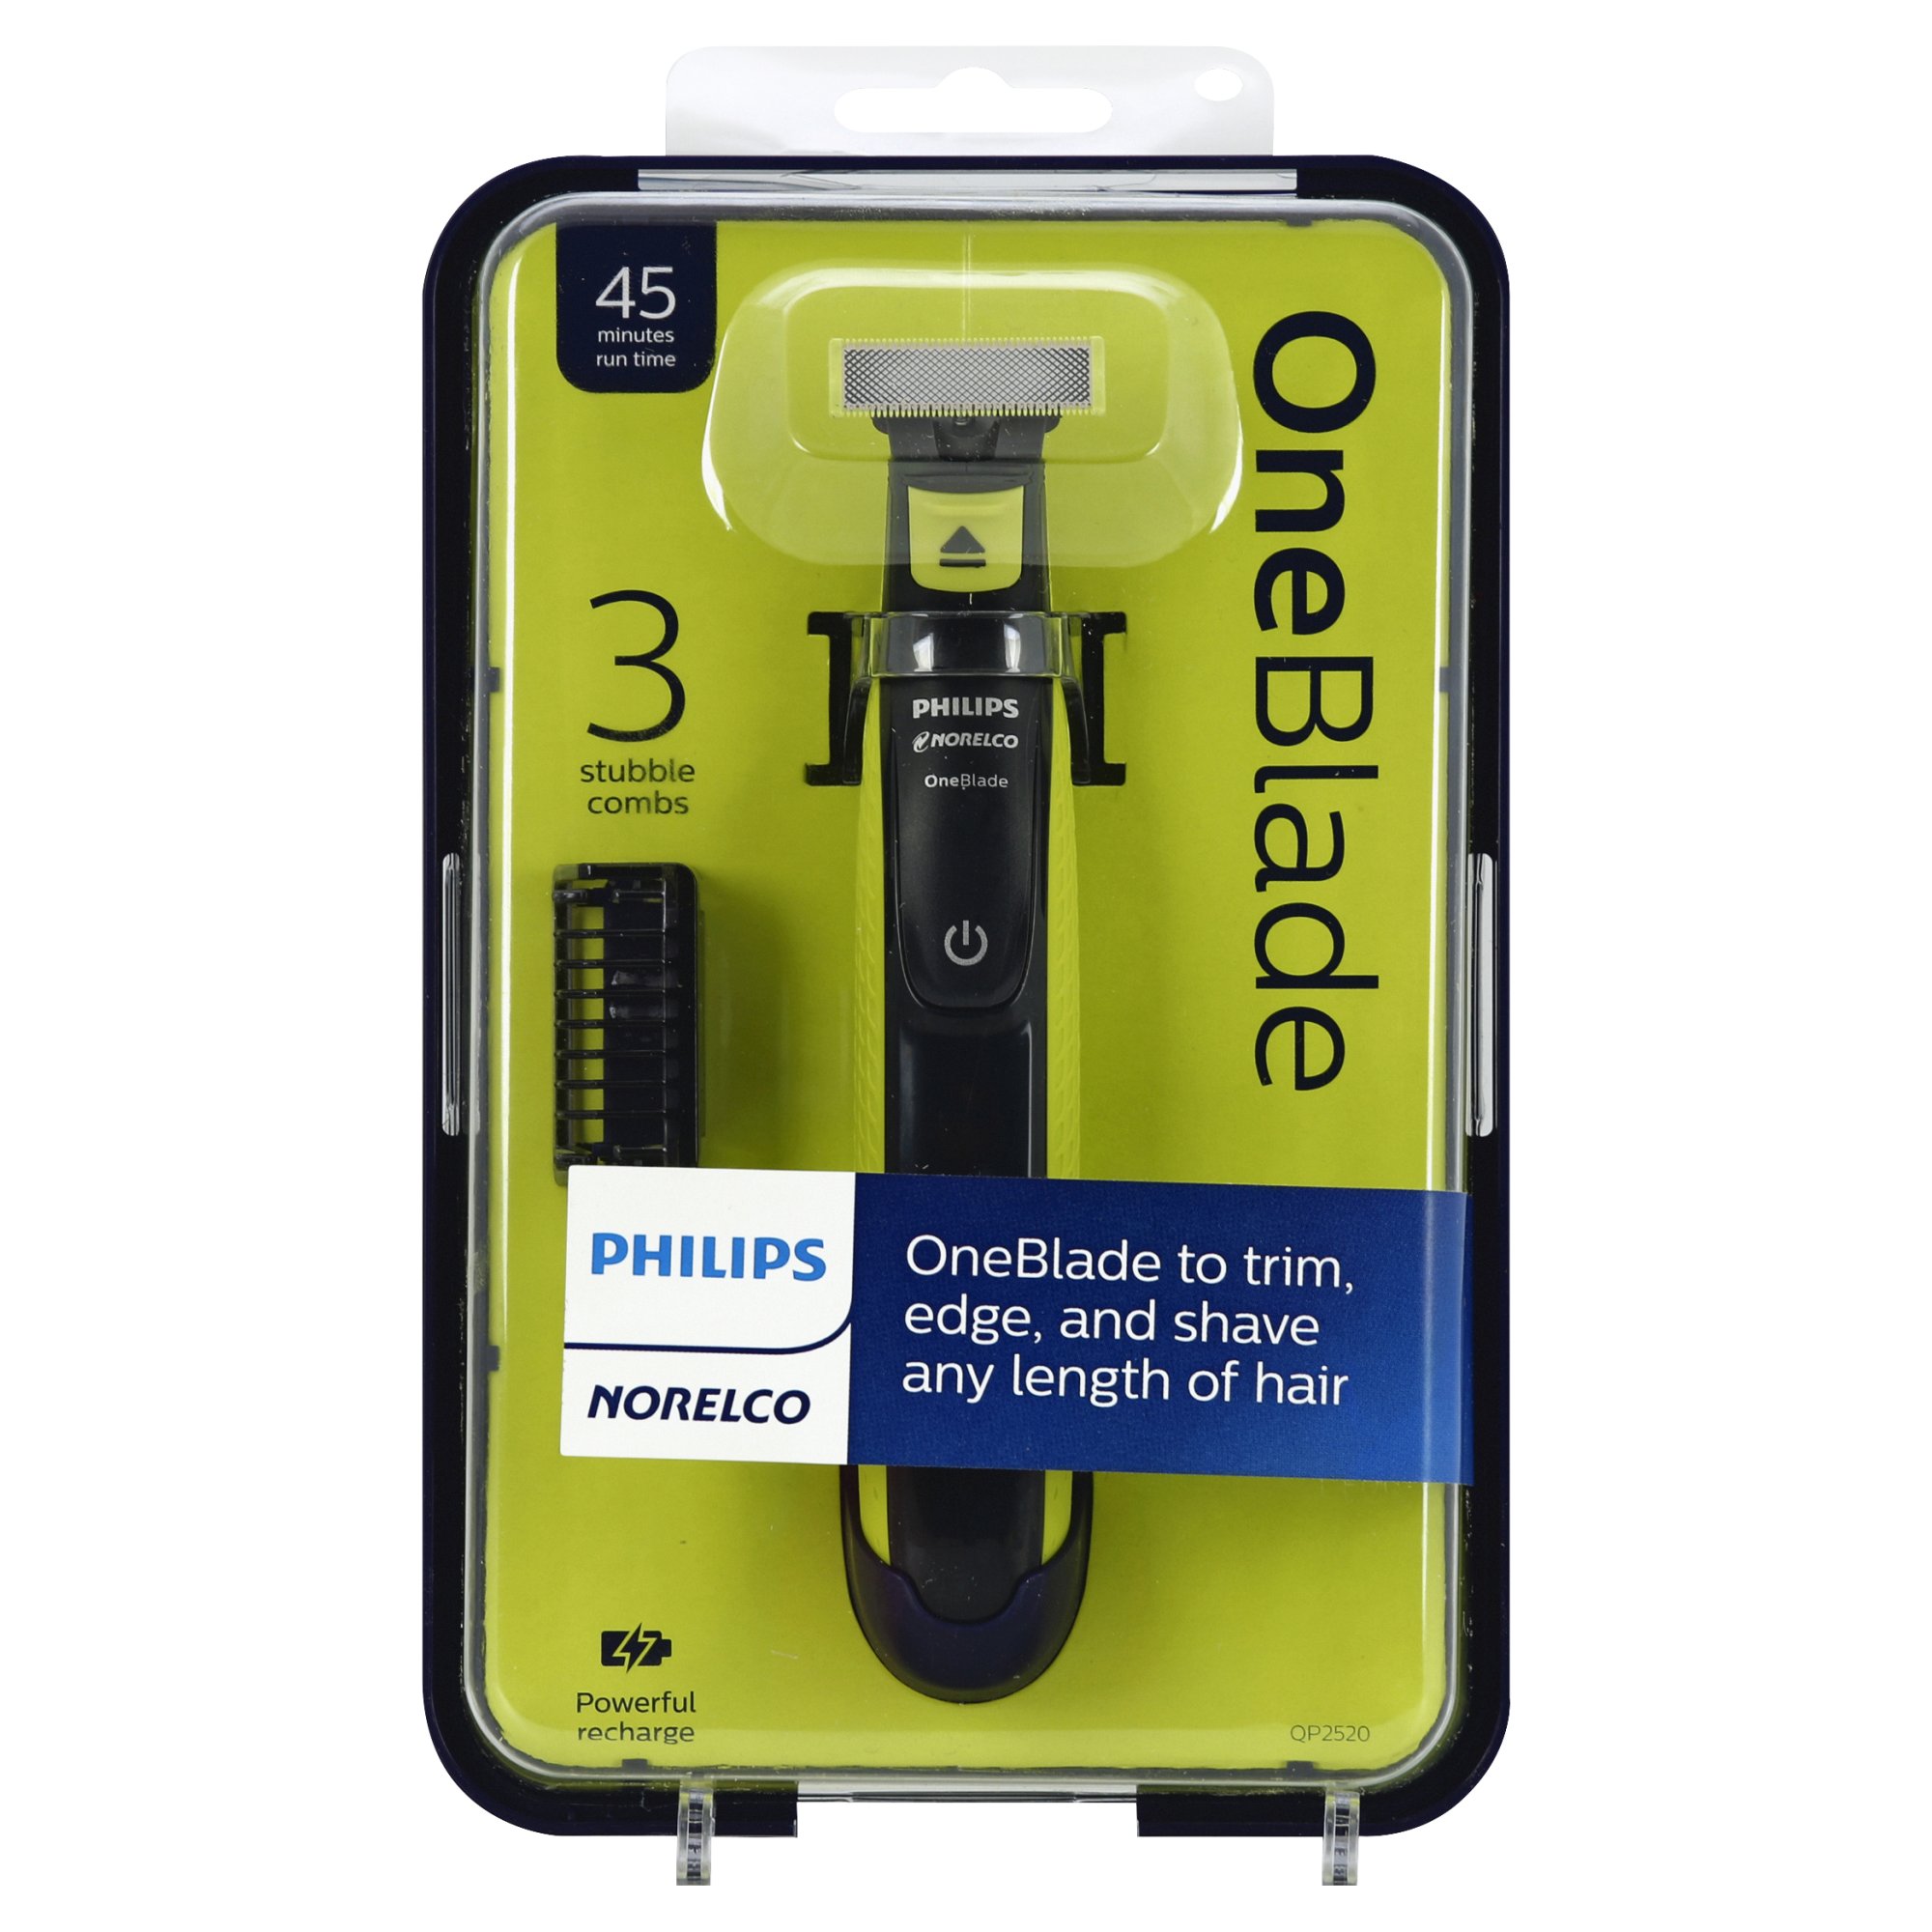 philips trim edge and shave